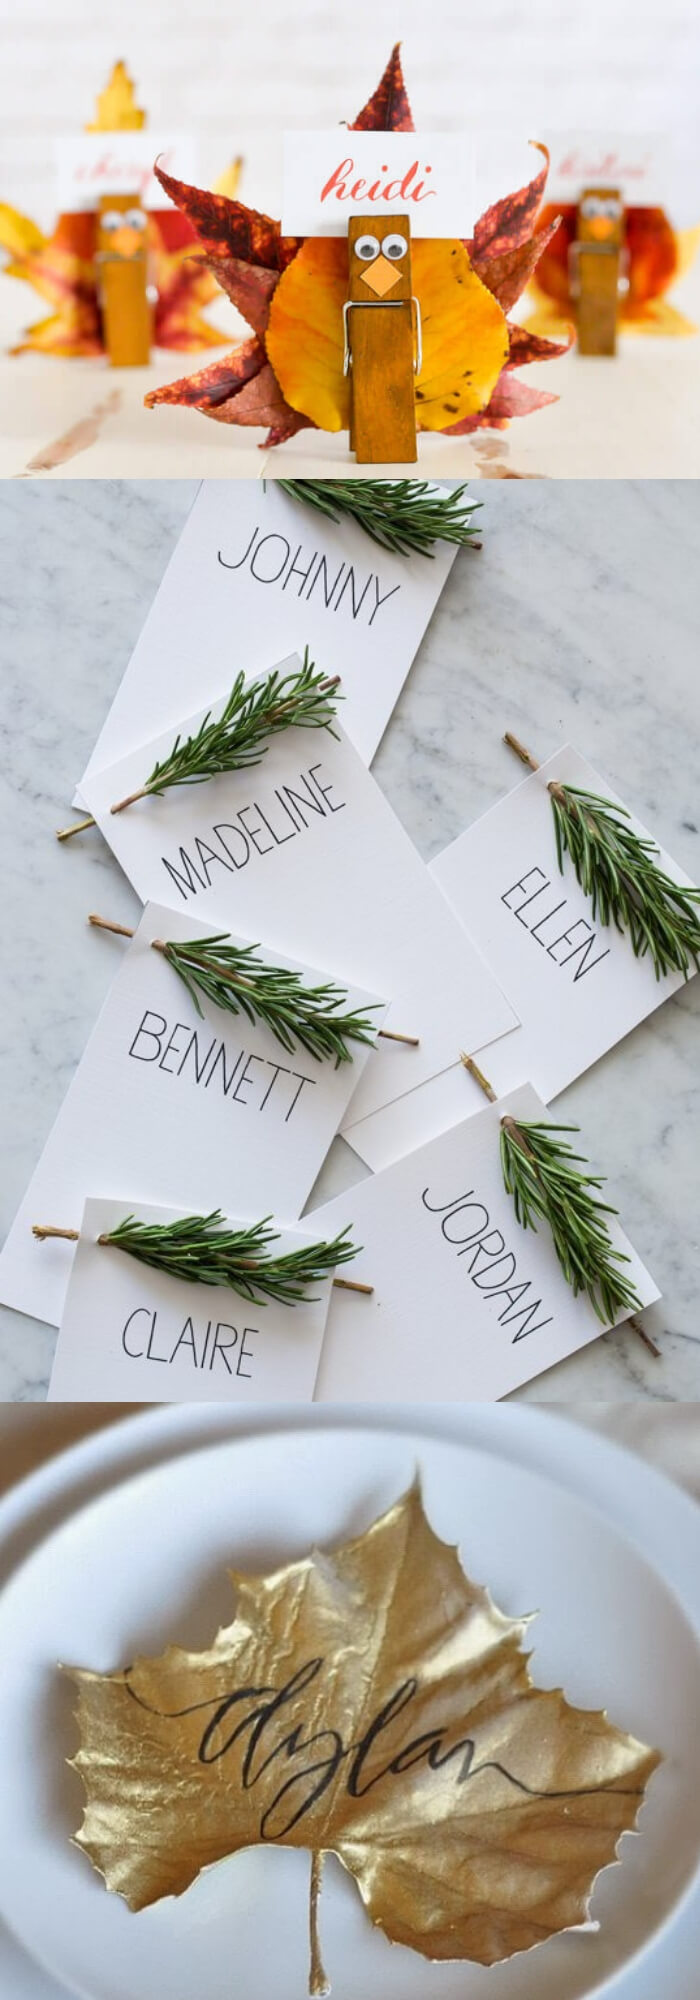 Place card for thanksgiving | Thanksgiving Gifts Kids Can Make - FarmFoodFamily.com